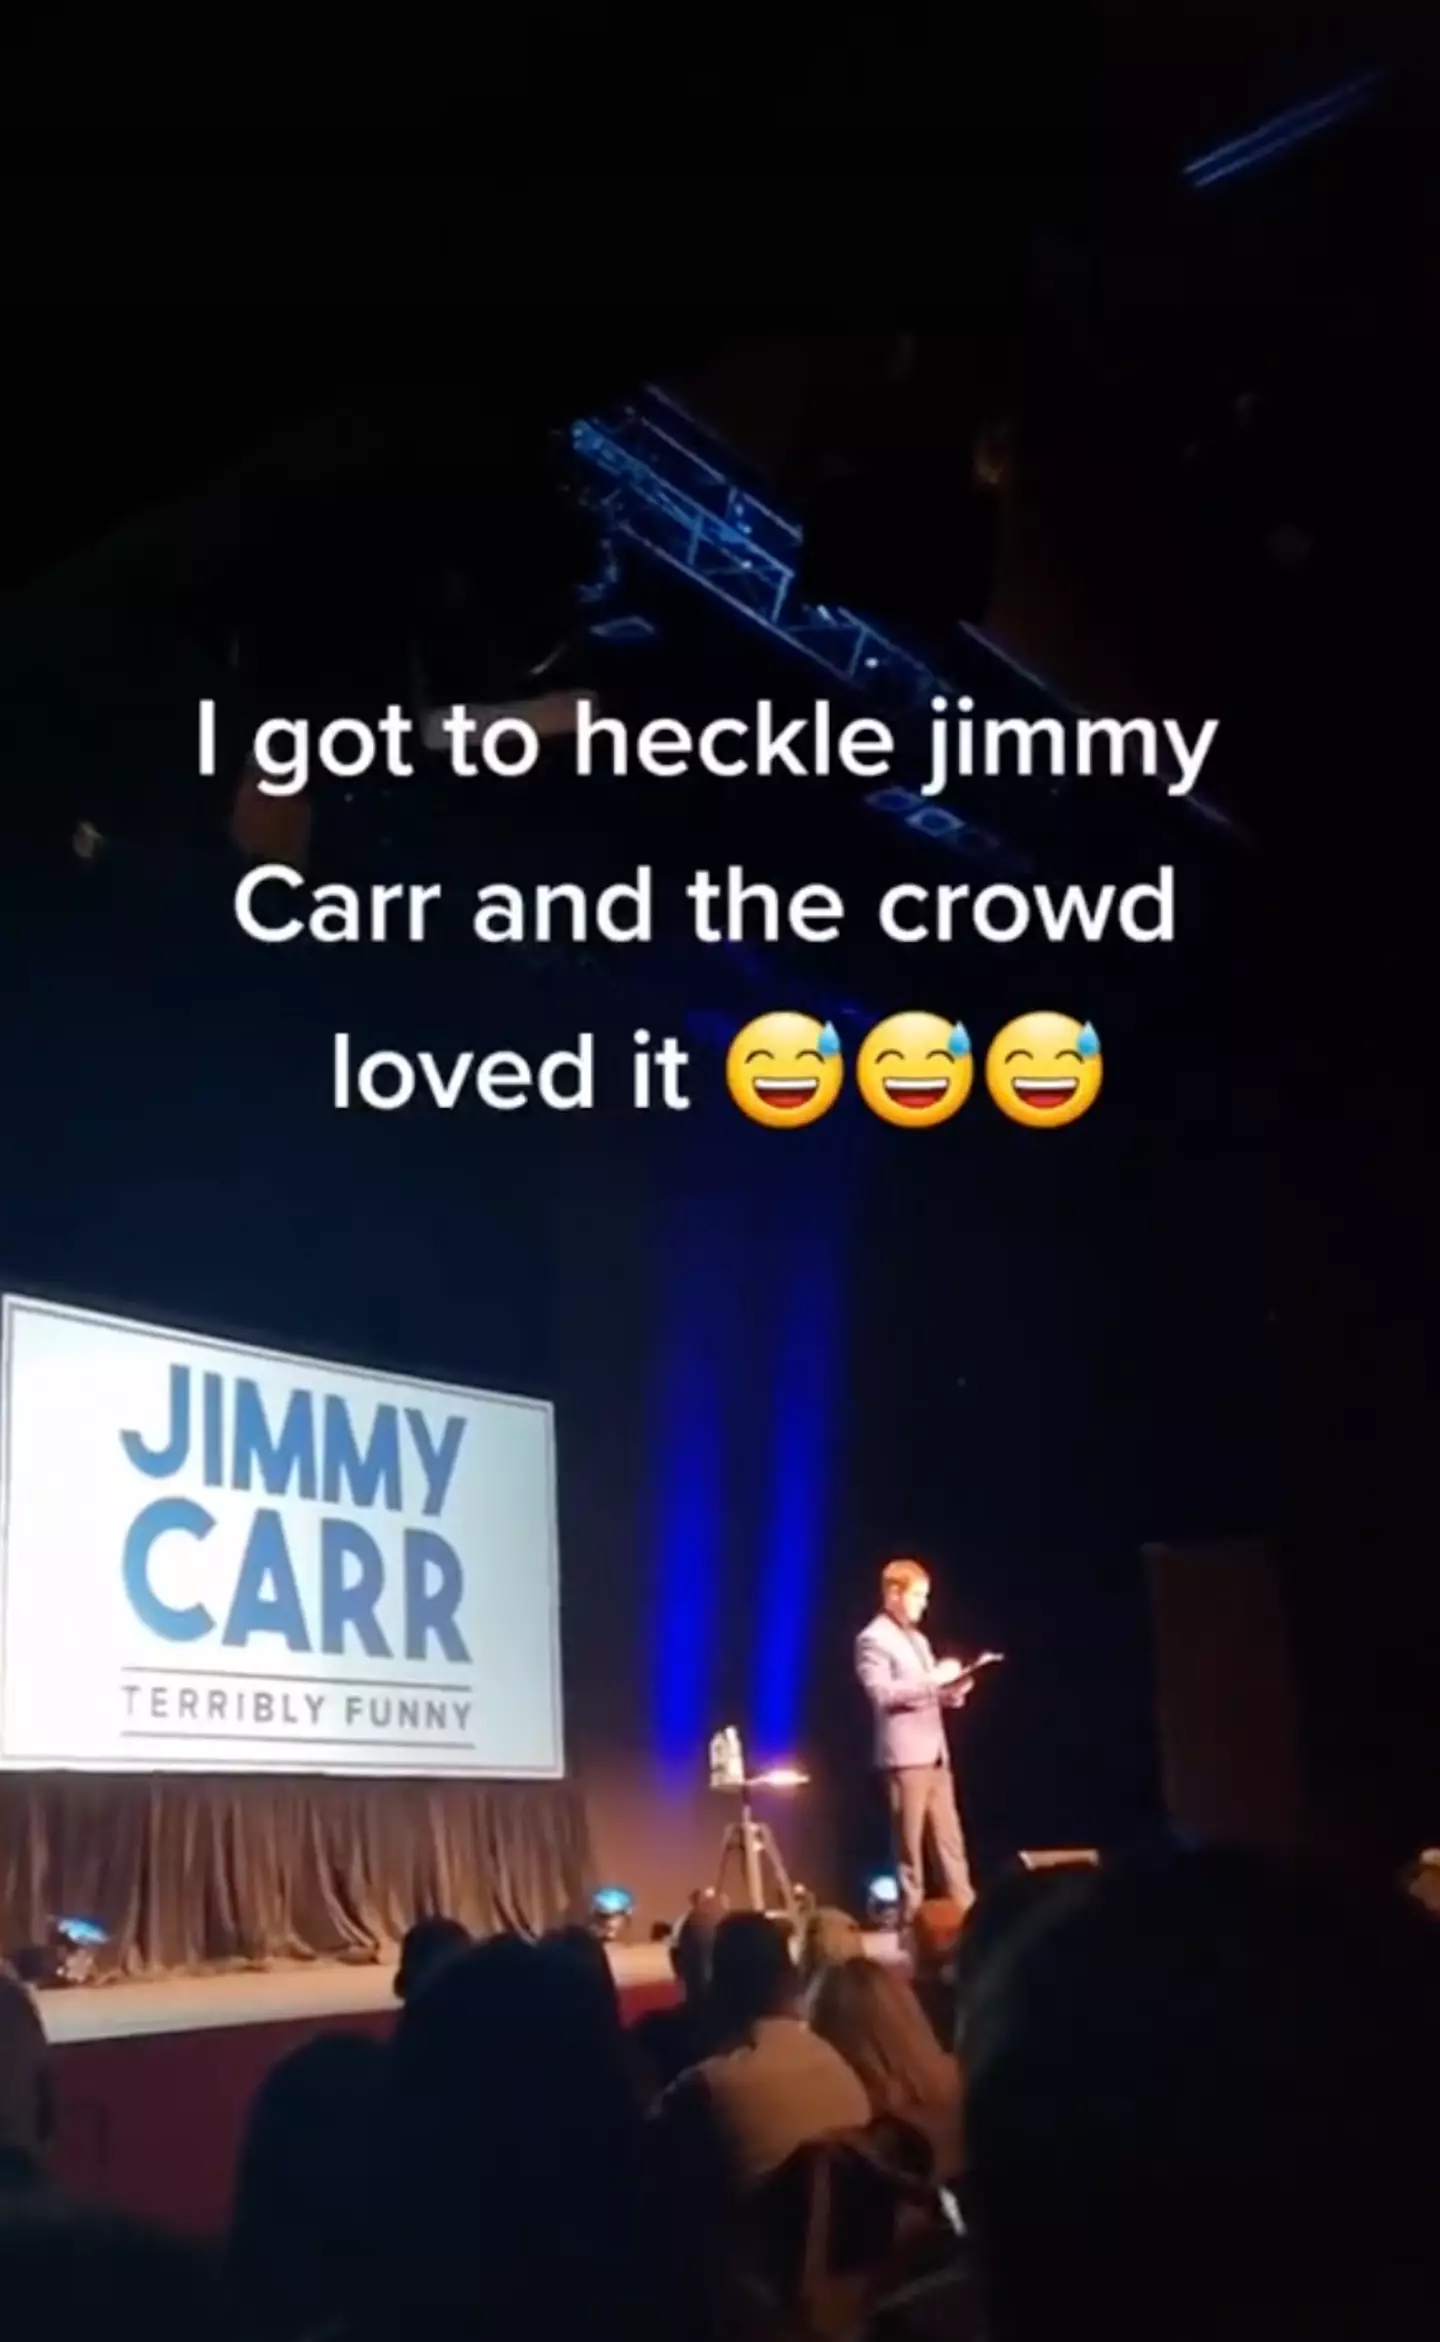 It seems as if Jimmy Carr has finally gotten a taste of his own medicine.